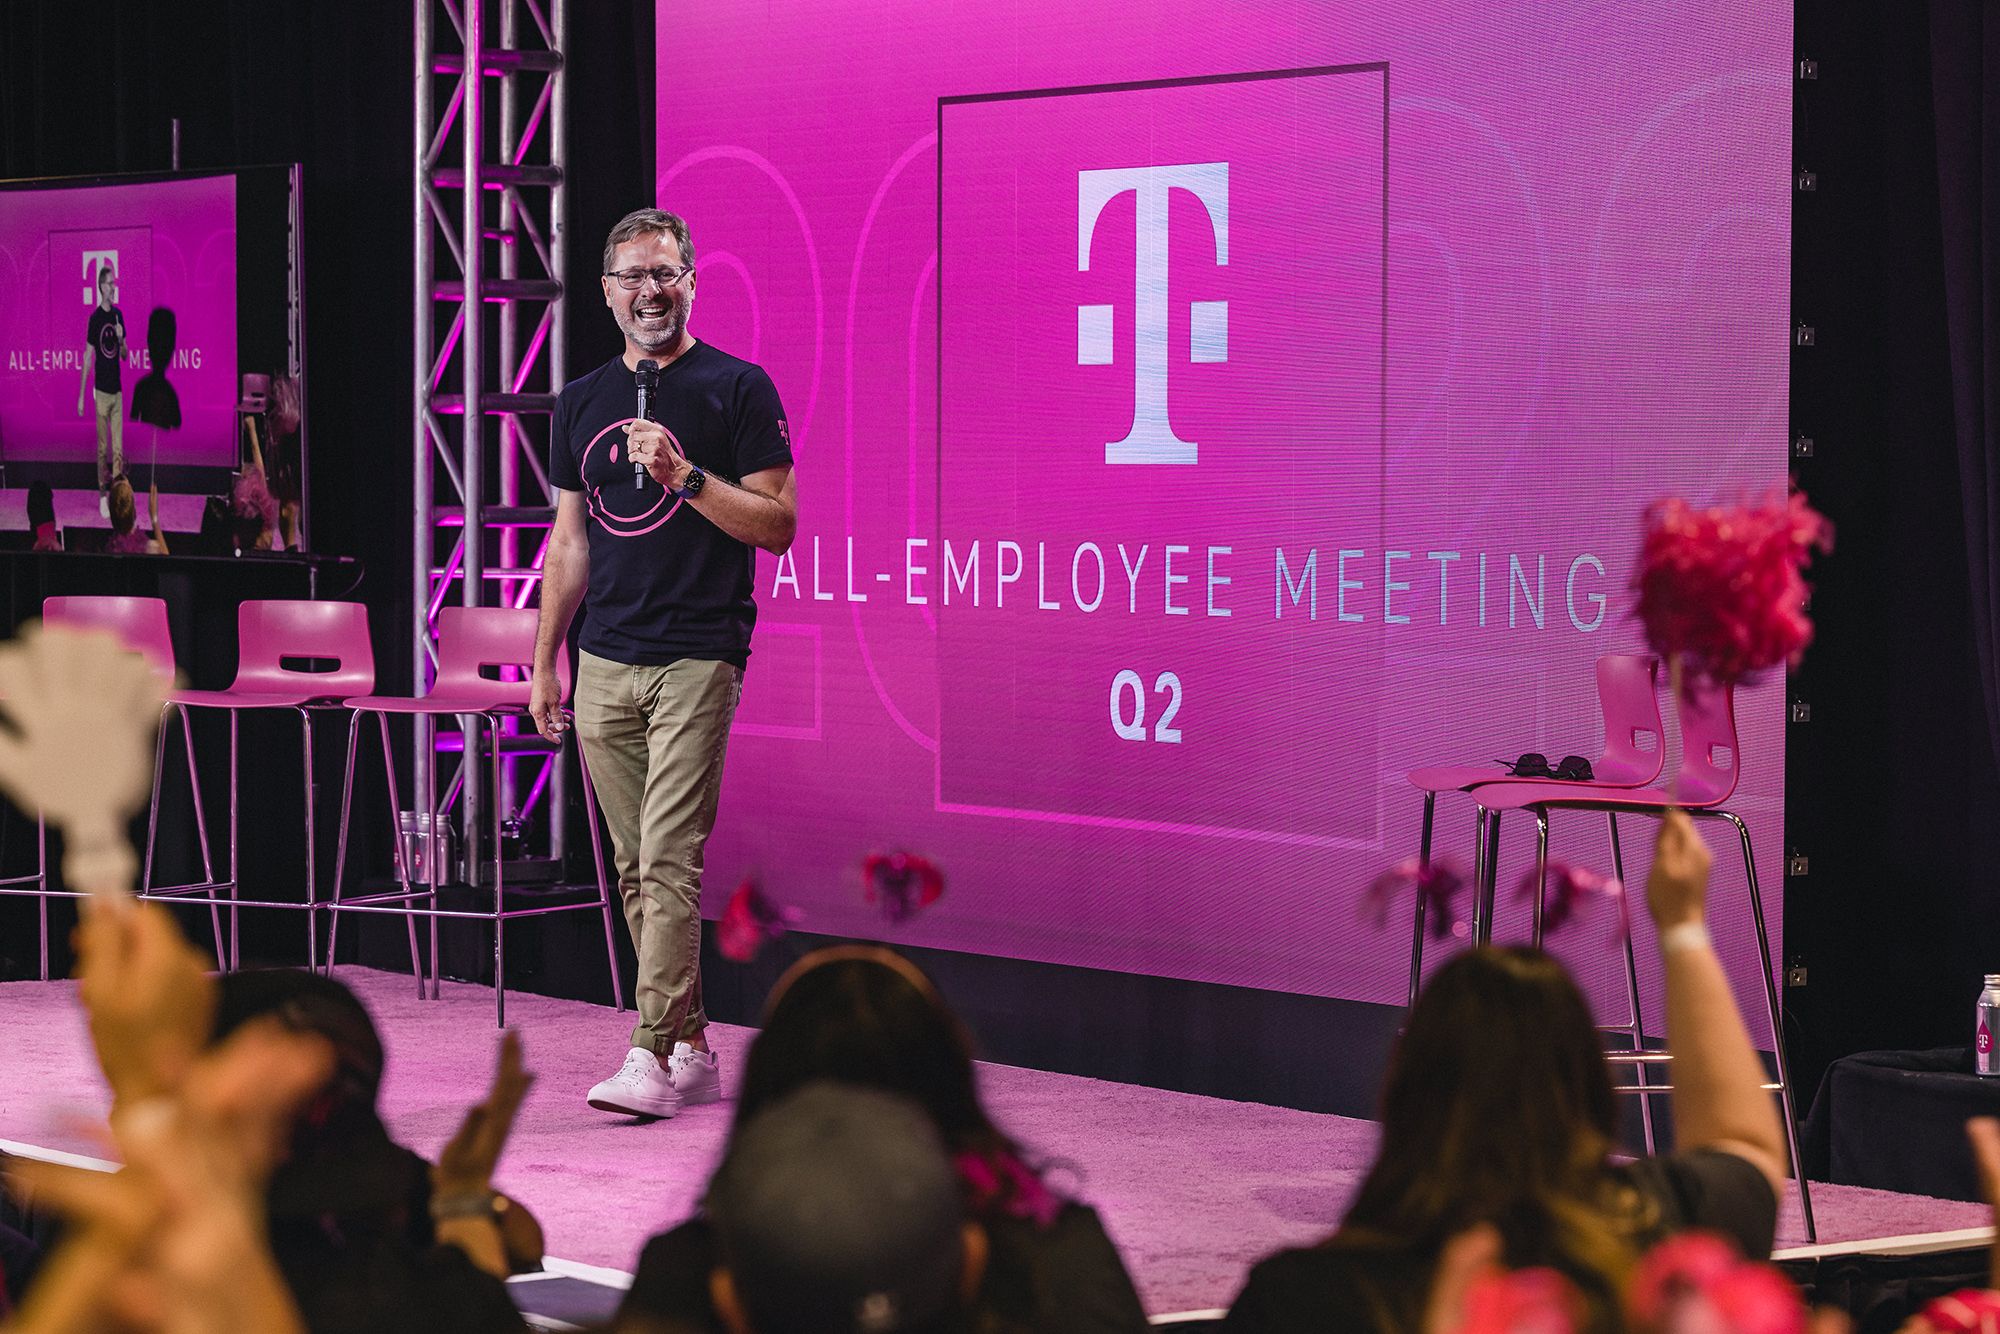 As T-Mobile Raises Prices, CEO's Hefty Paycheck Sparks Outrage Among Customers